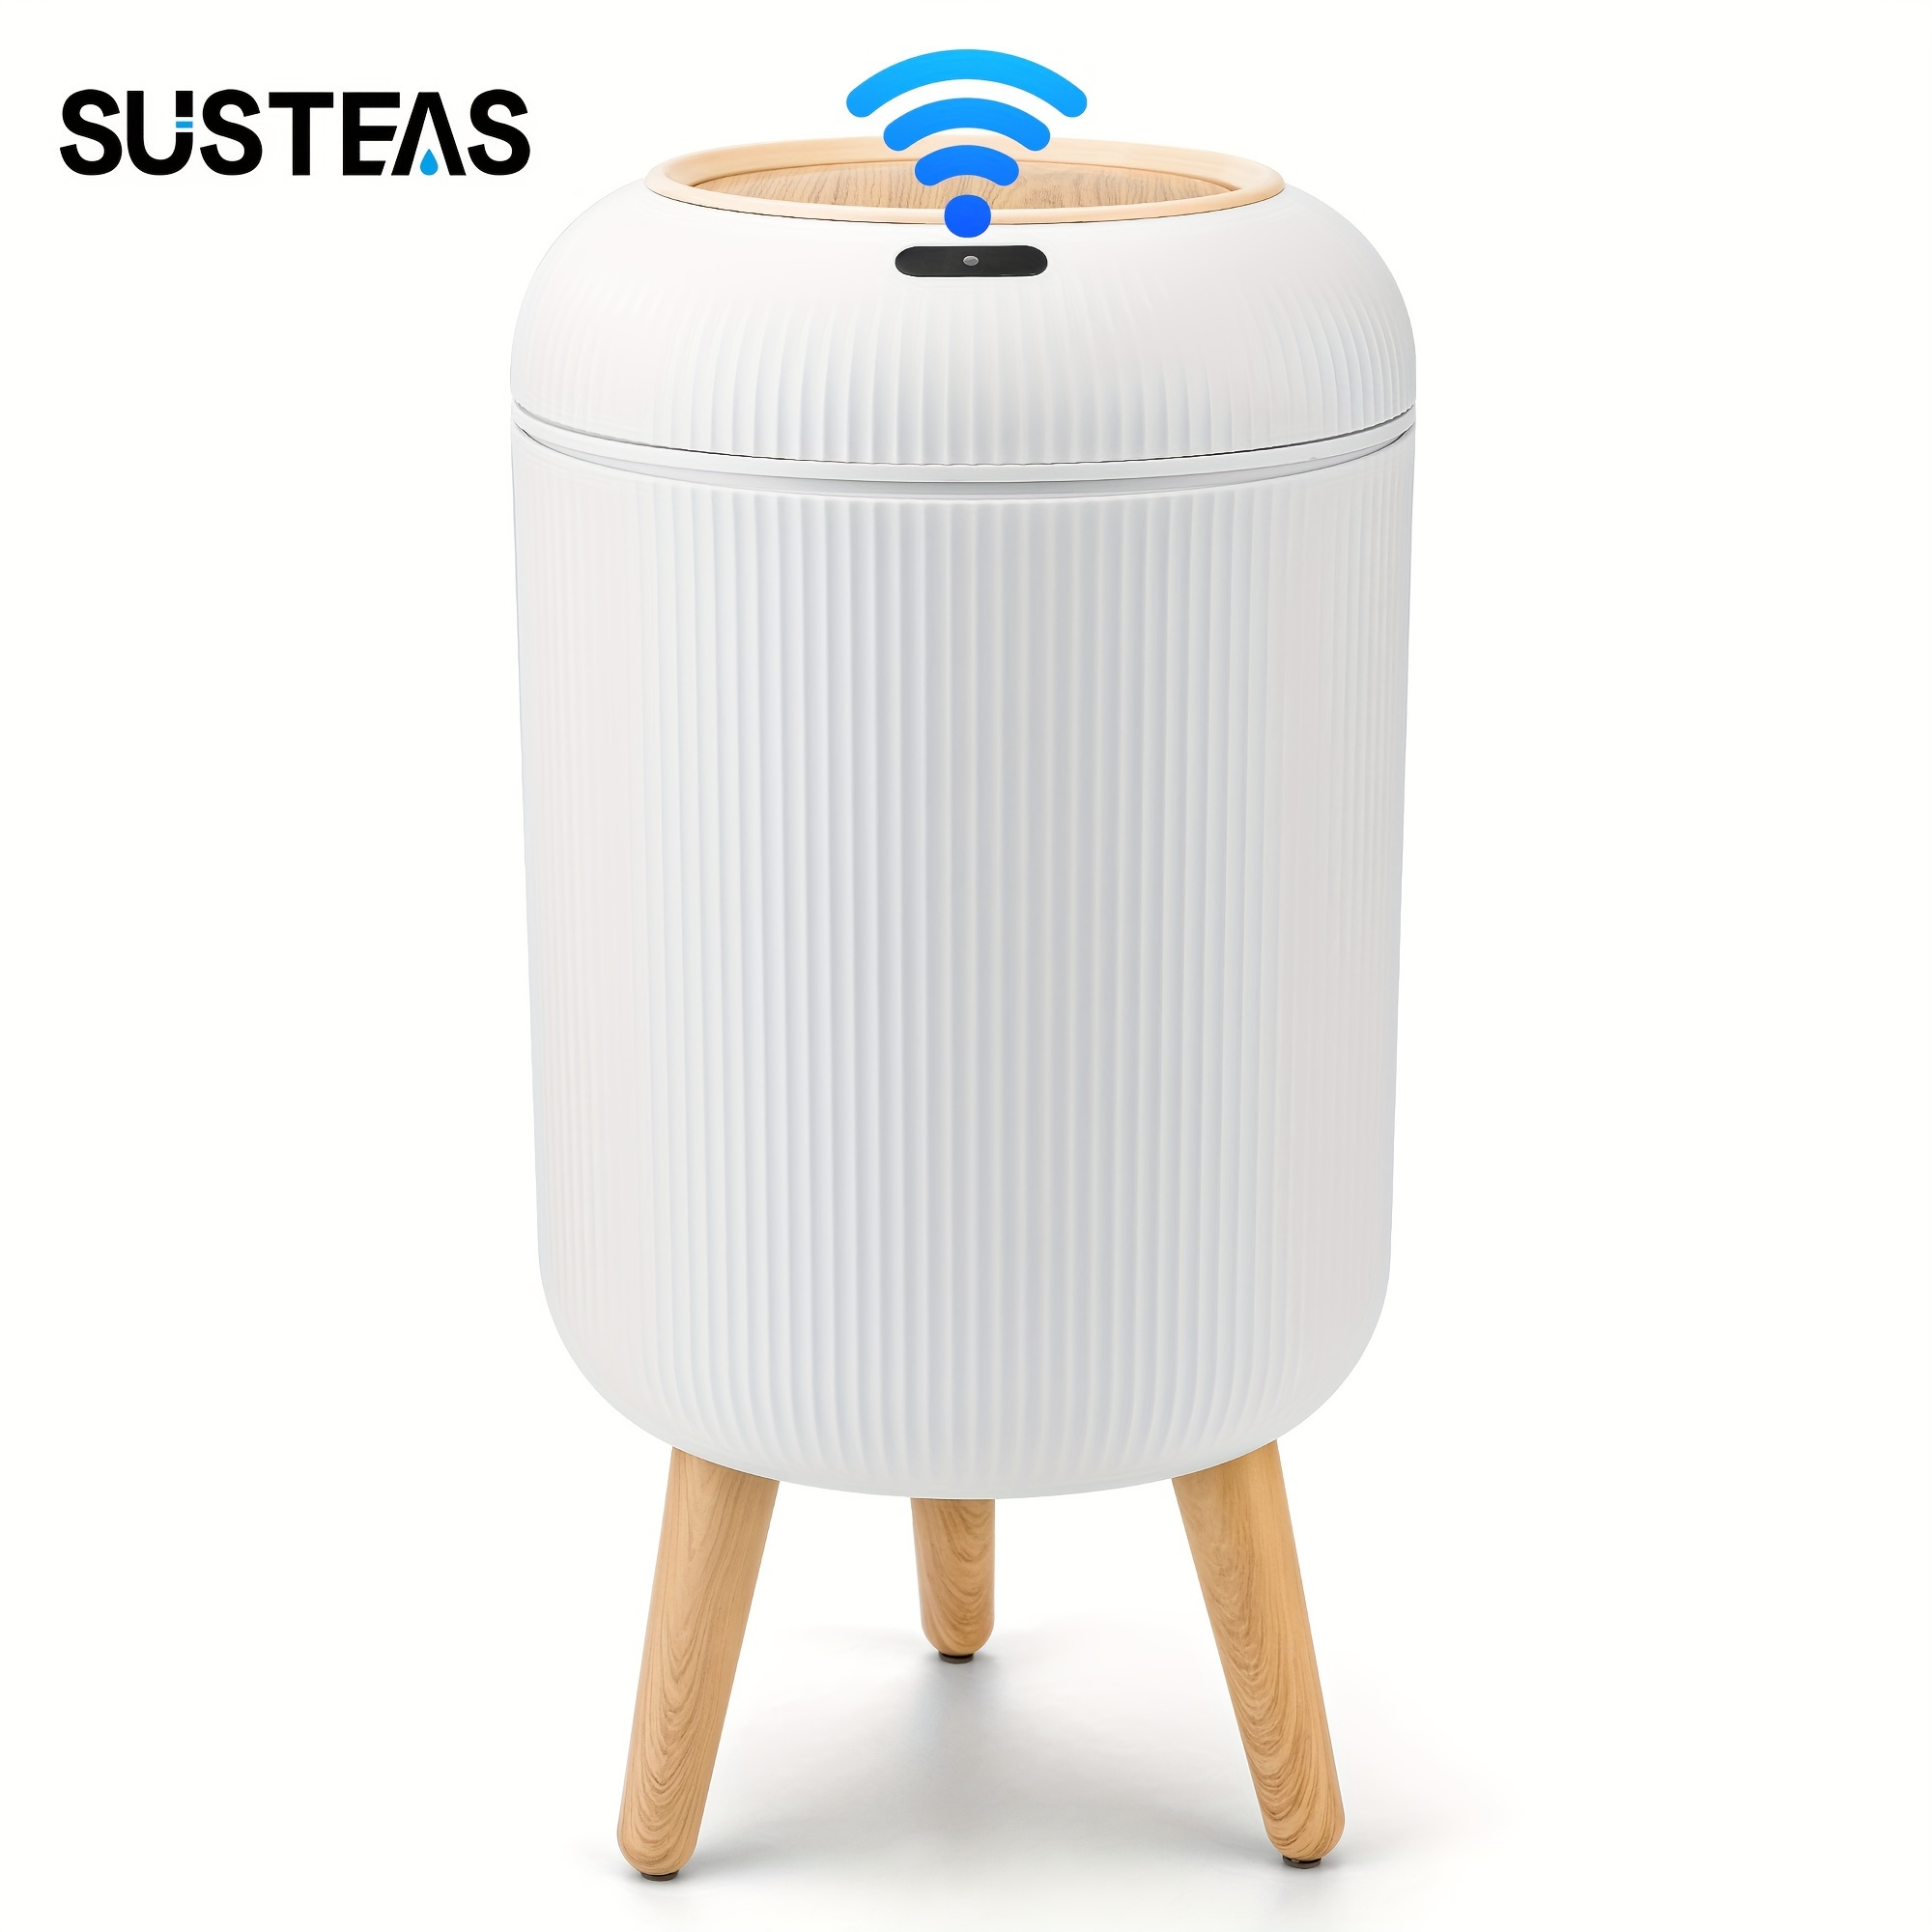 

Susteas Motion Sensor Trash Can With Lid, Touchless Trash Can, Automatic Waterproof Garbage Can Plastic Trash Bins Suitable For Kitchen, Bathroom, Bedroom, Living Room, Office, Outdoor (white)